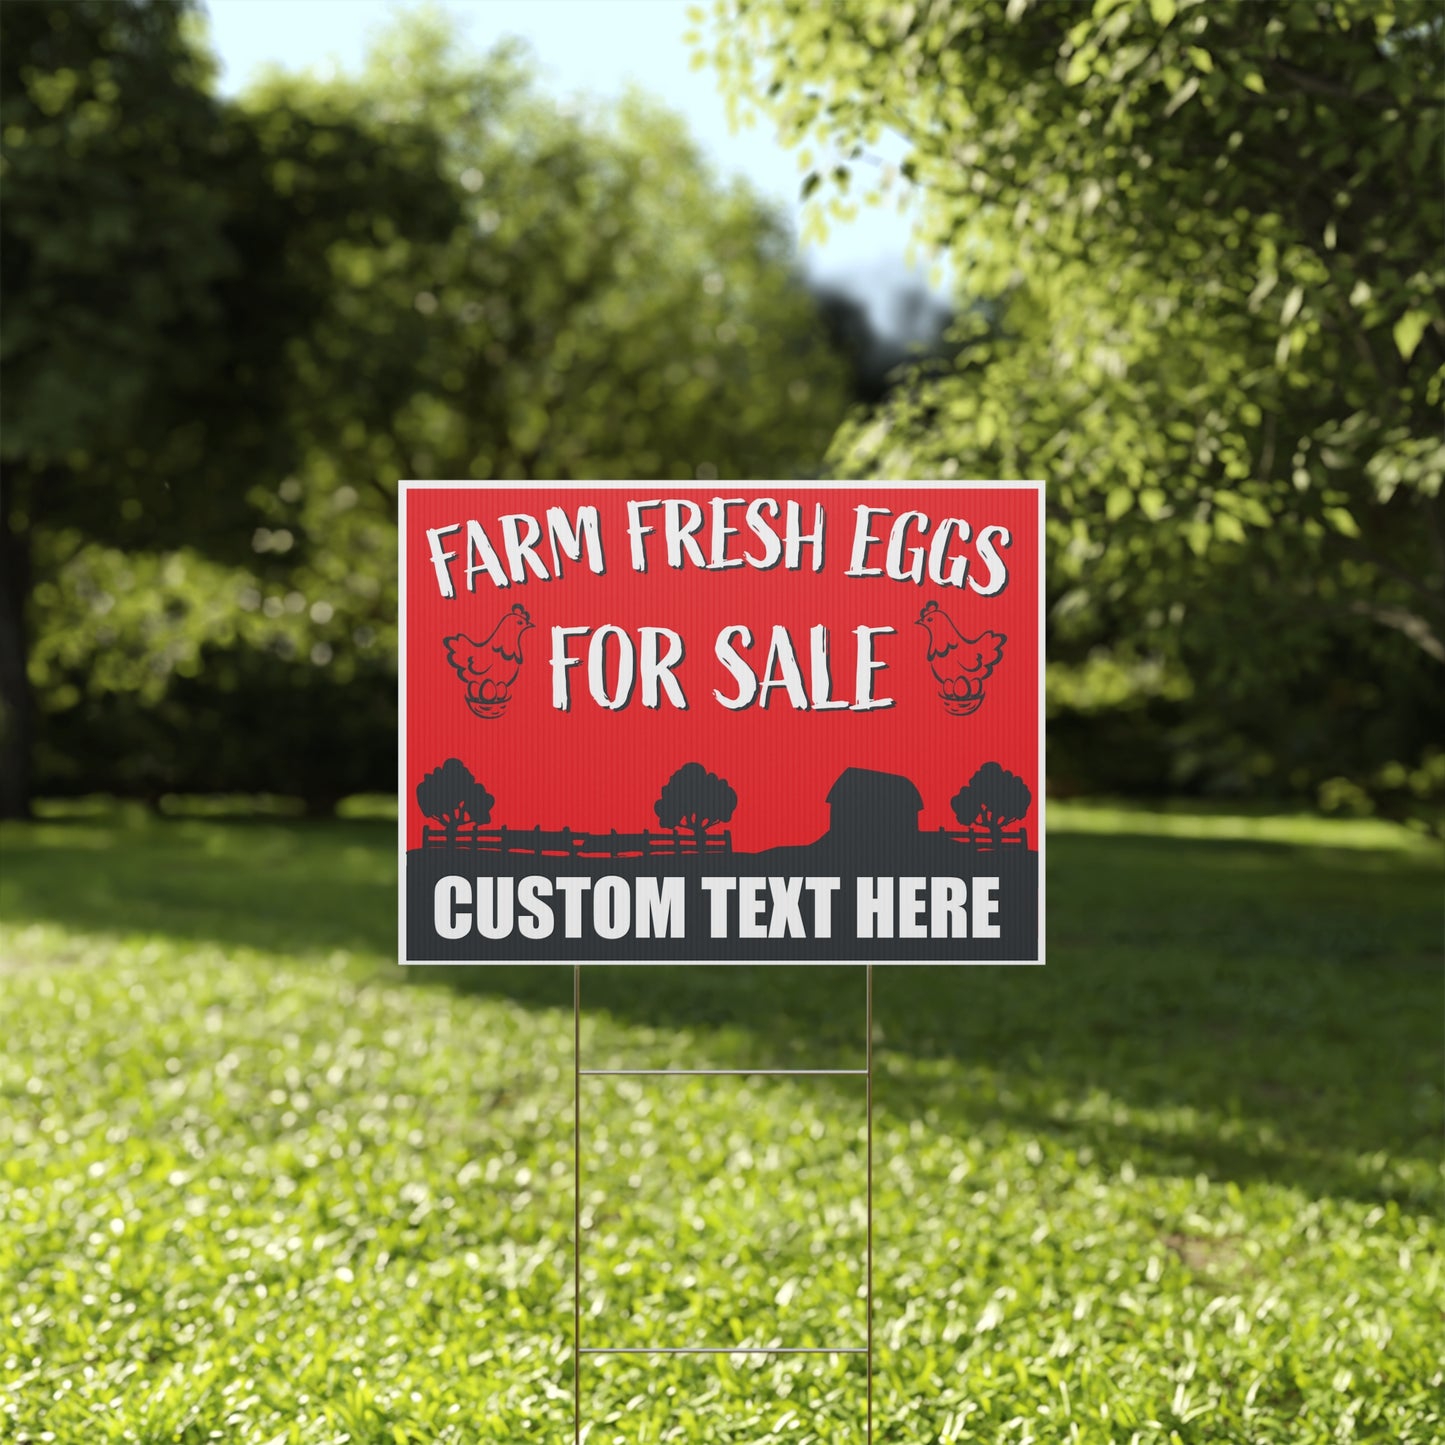 Custom Farm Fresh Eggs For Sale Yard Sign 24 x 36-inch (Outdoor, Weatherproof Corrugated Plastic) Metal H-Stake Included v2_Red